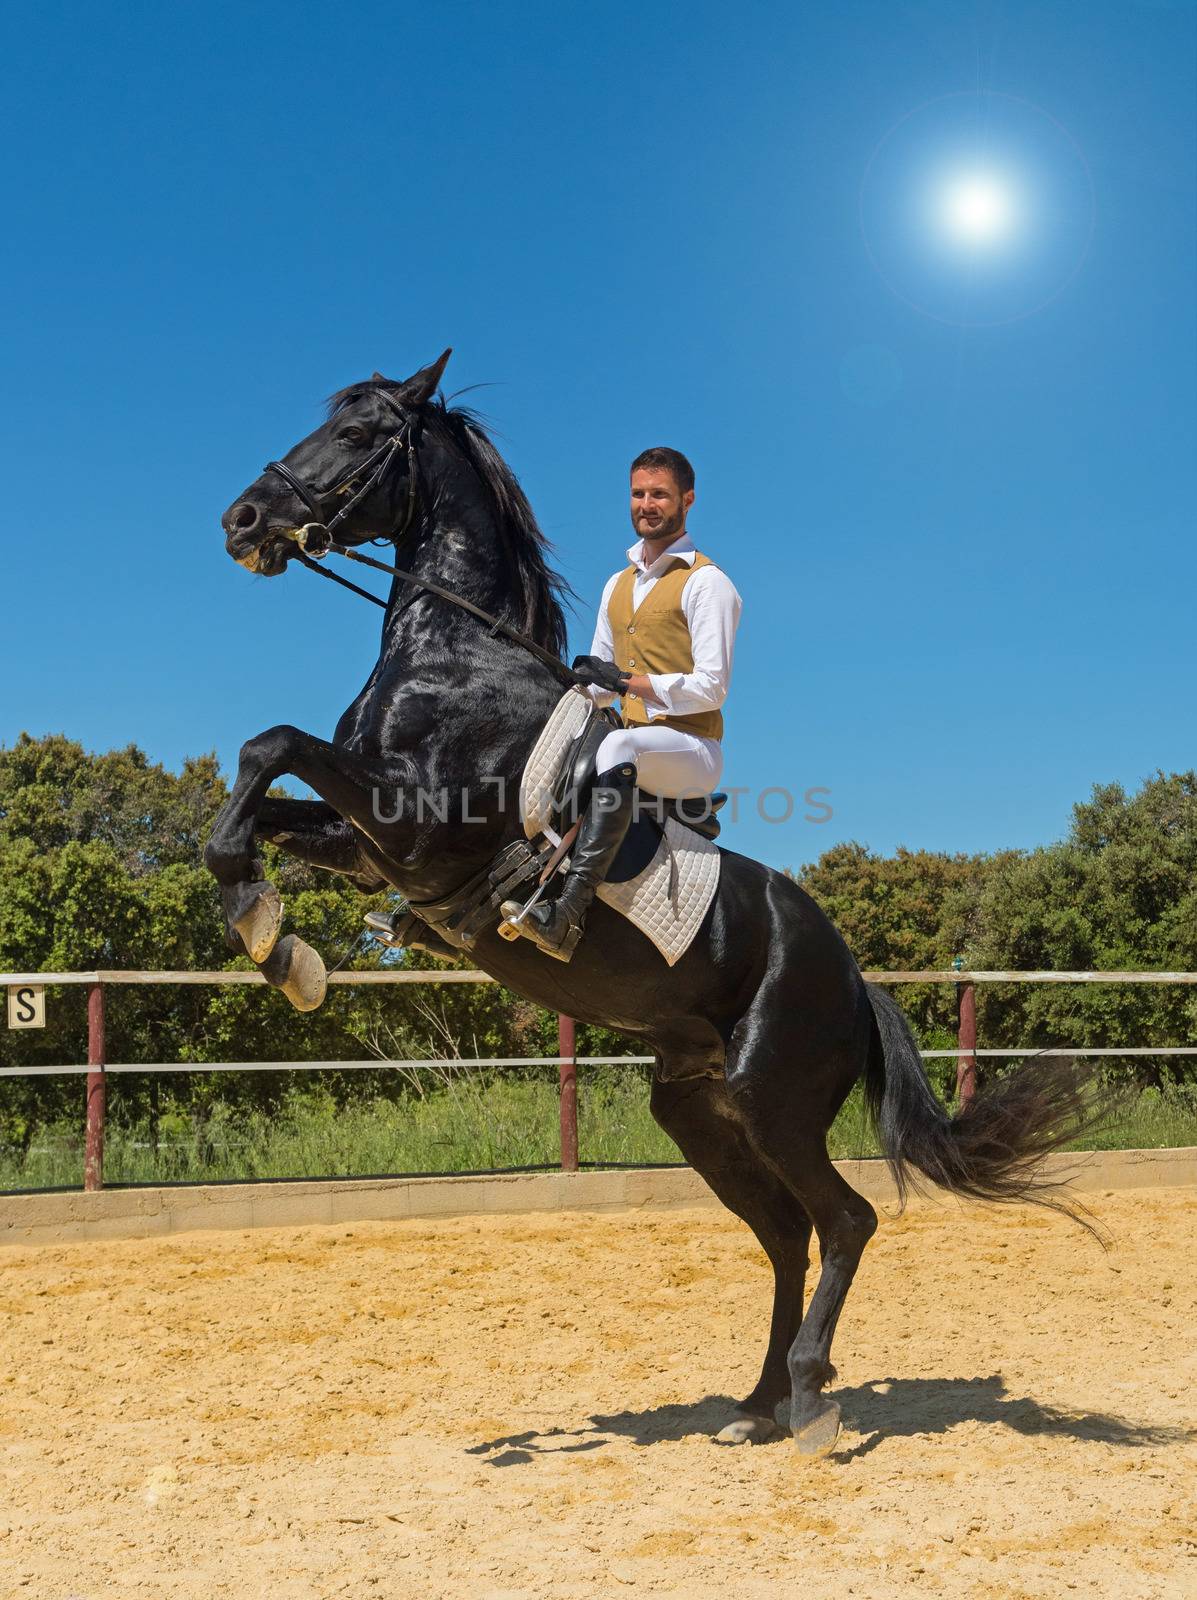 trianing of dressage for a riding man and stallion 